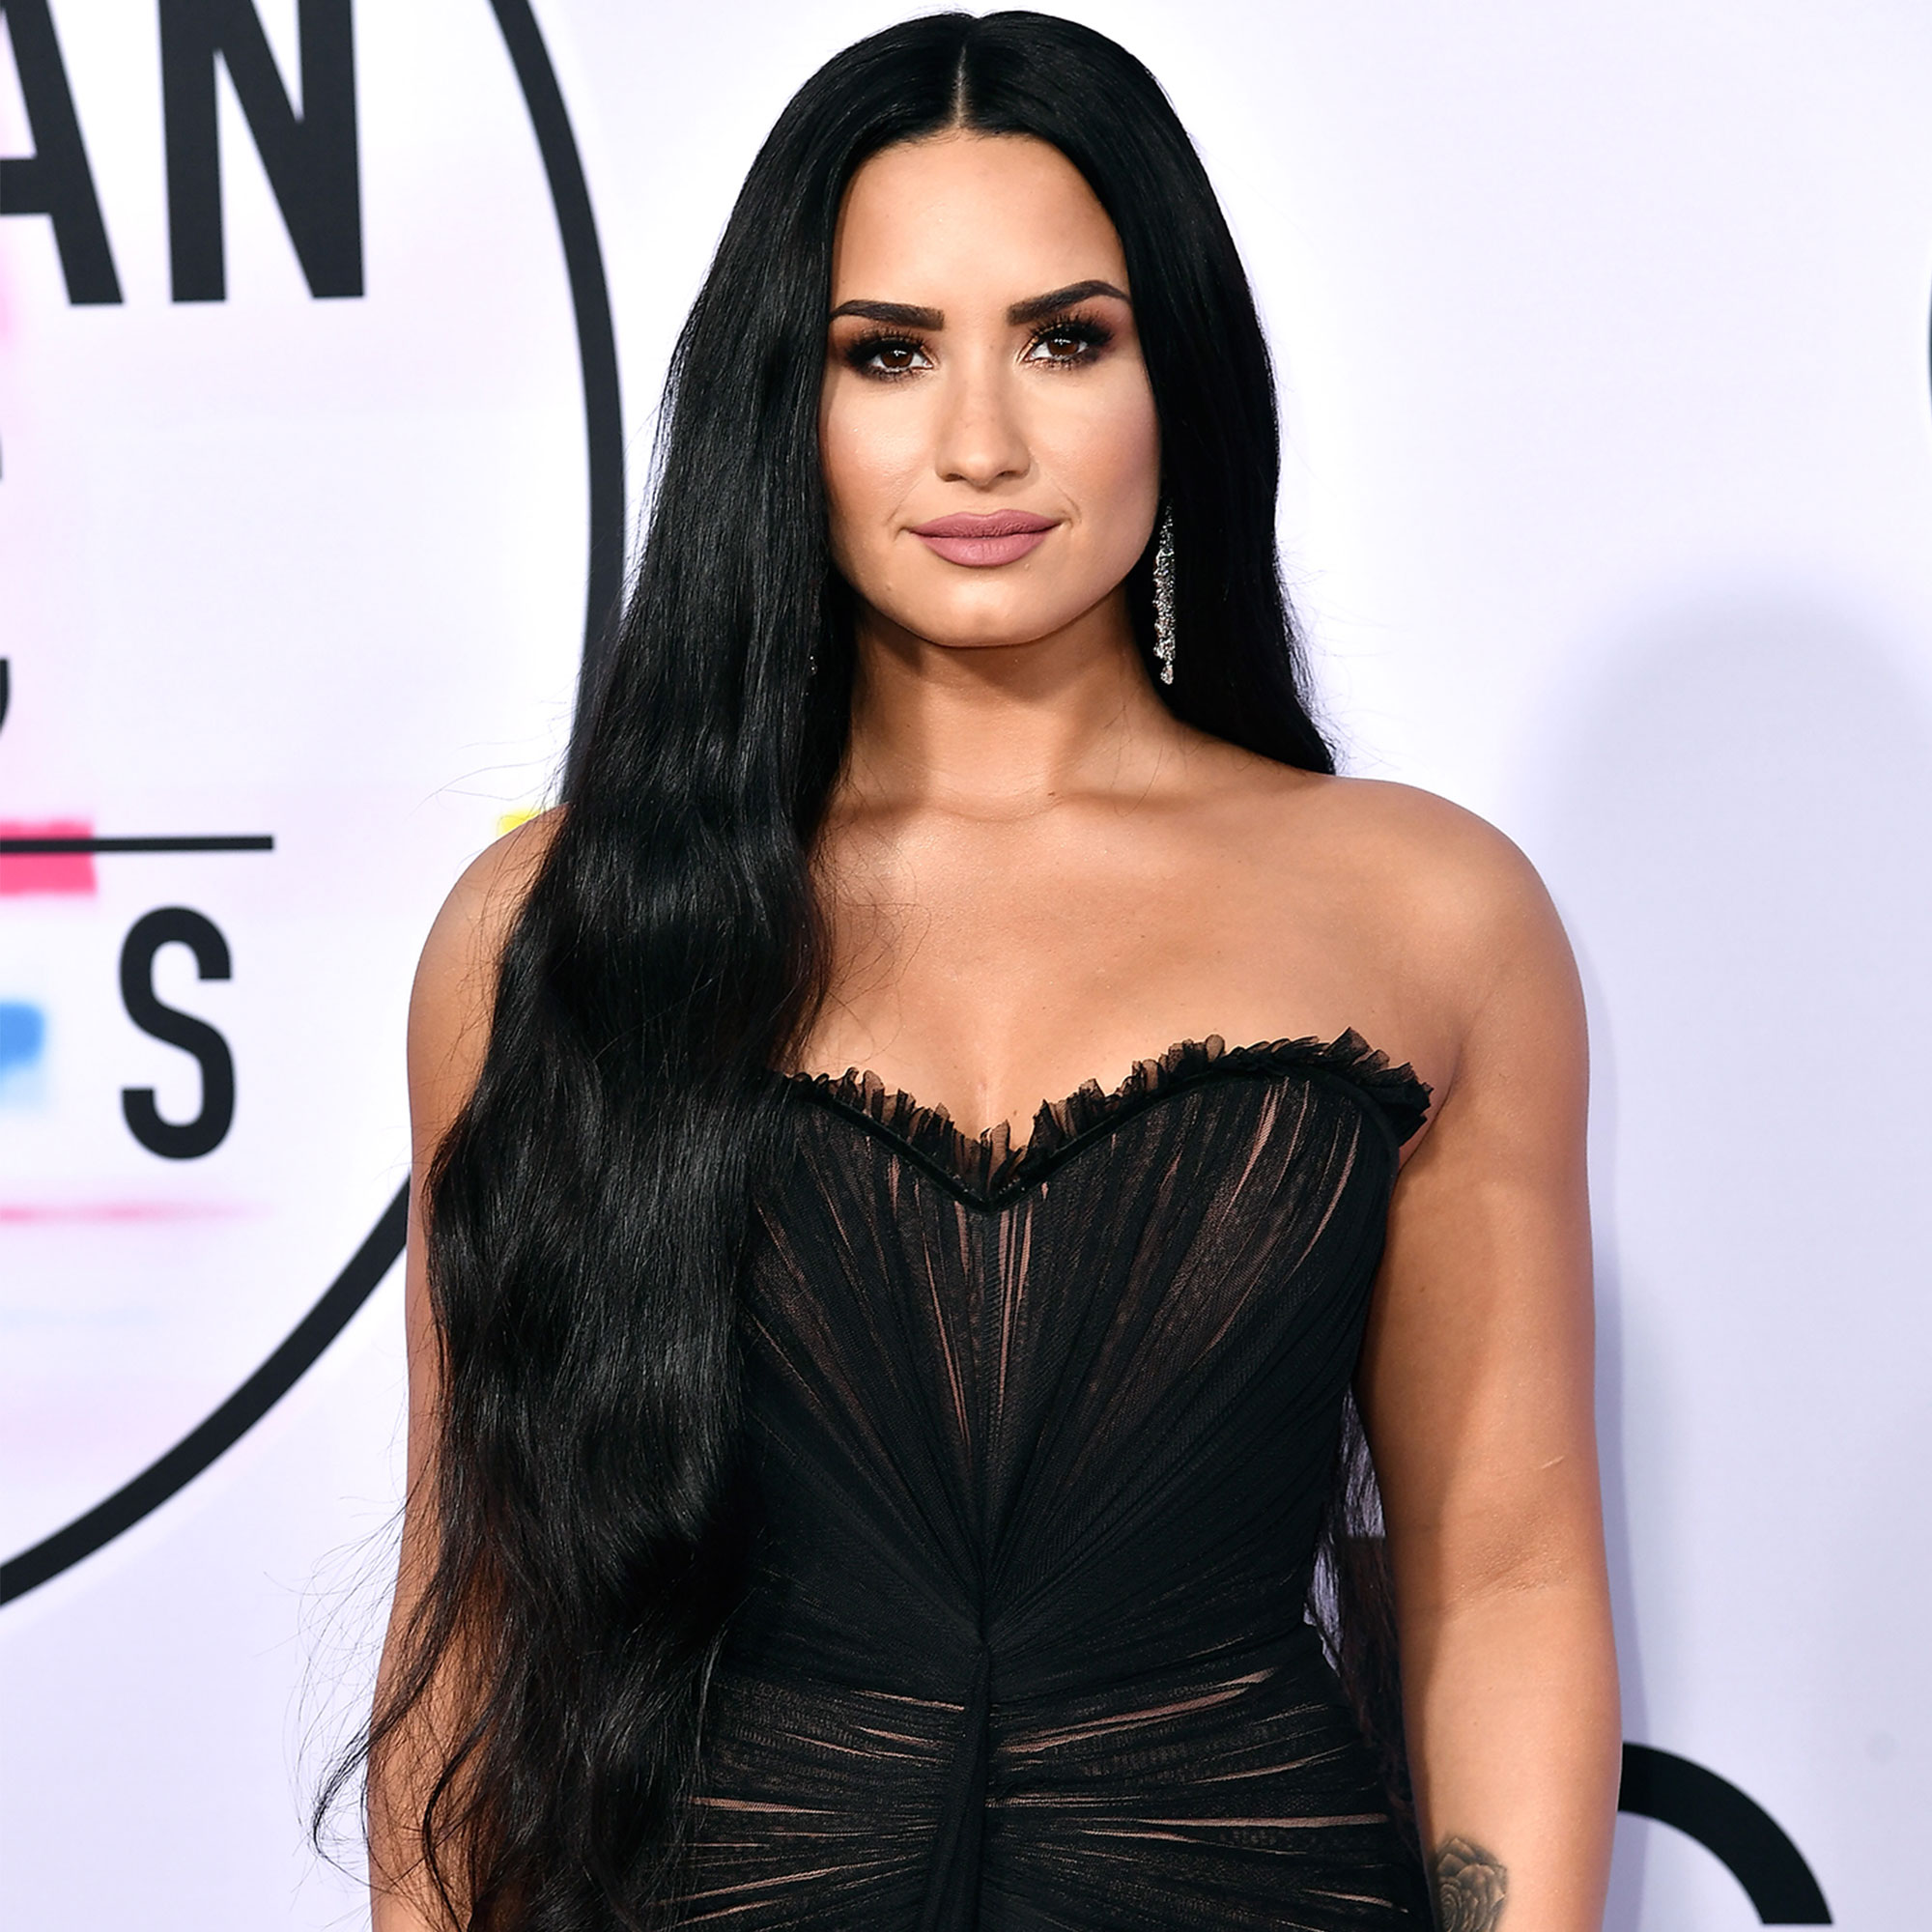 Demi Lovato Goes All Out